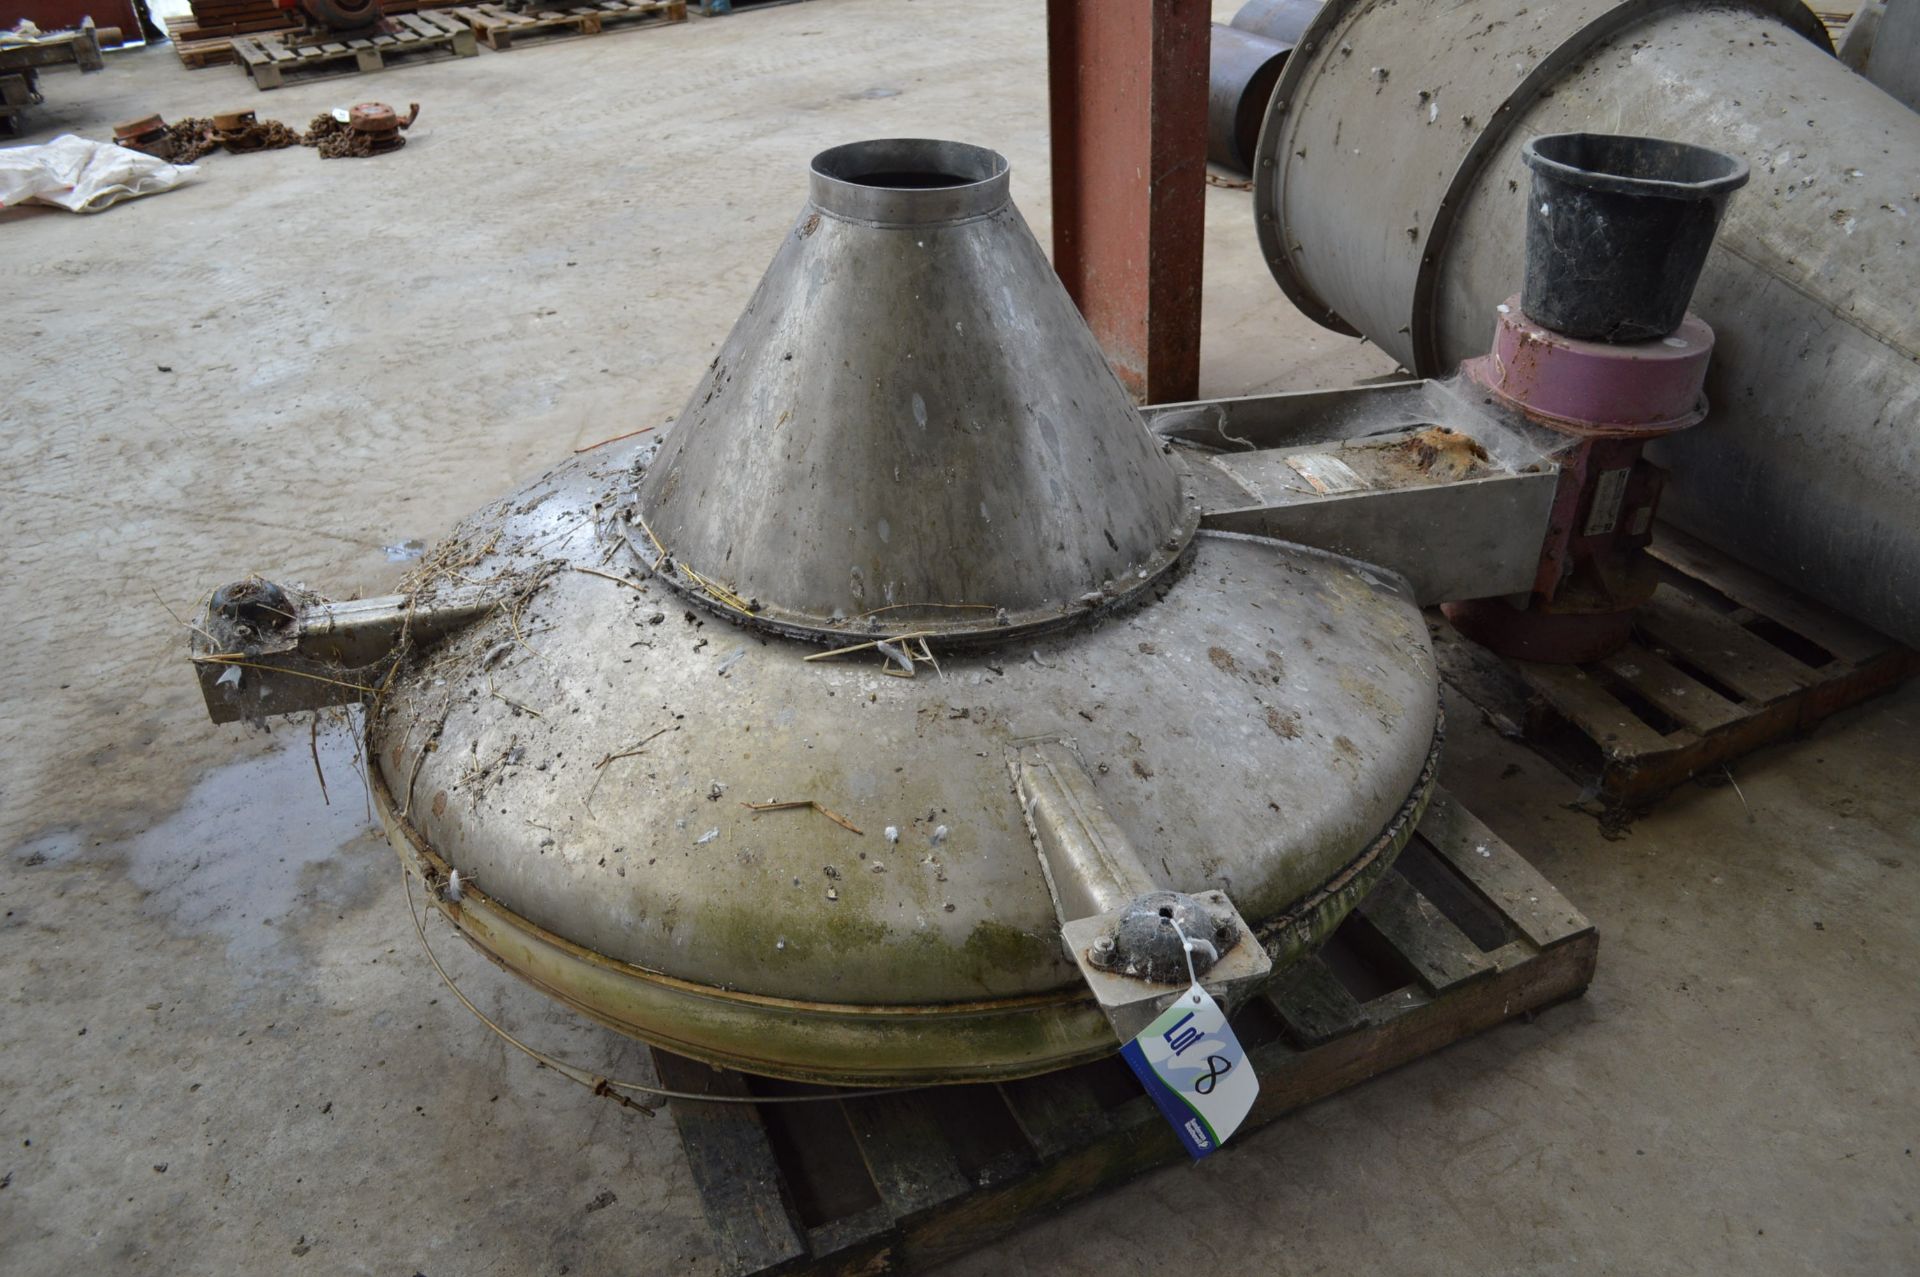 Simon-Solitec approx. 1.5m dia. STAINLESS STEEL SILO DISCHARGE ACTIVATOR, serial no. S92844D, with